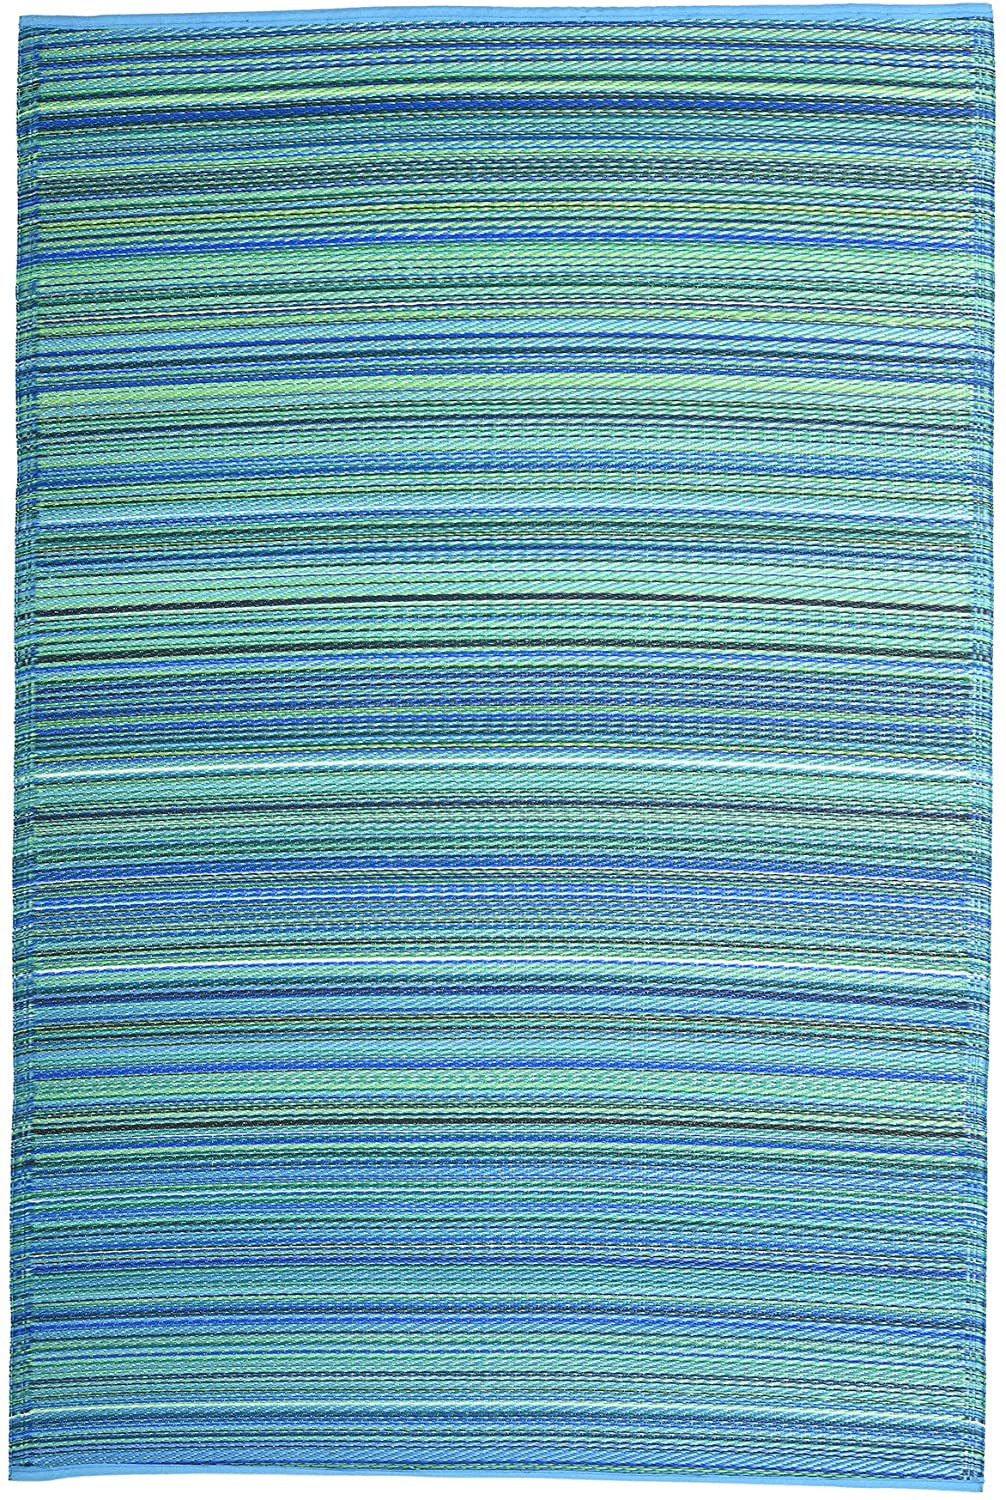 Fab Habitat Waterproof Recycled Plastic Front Porch Rug